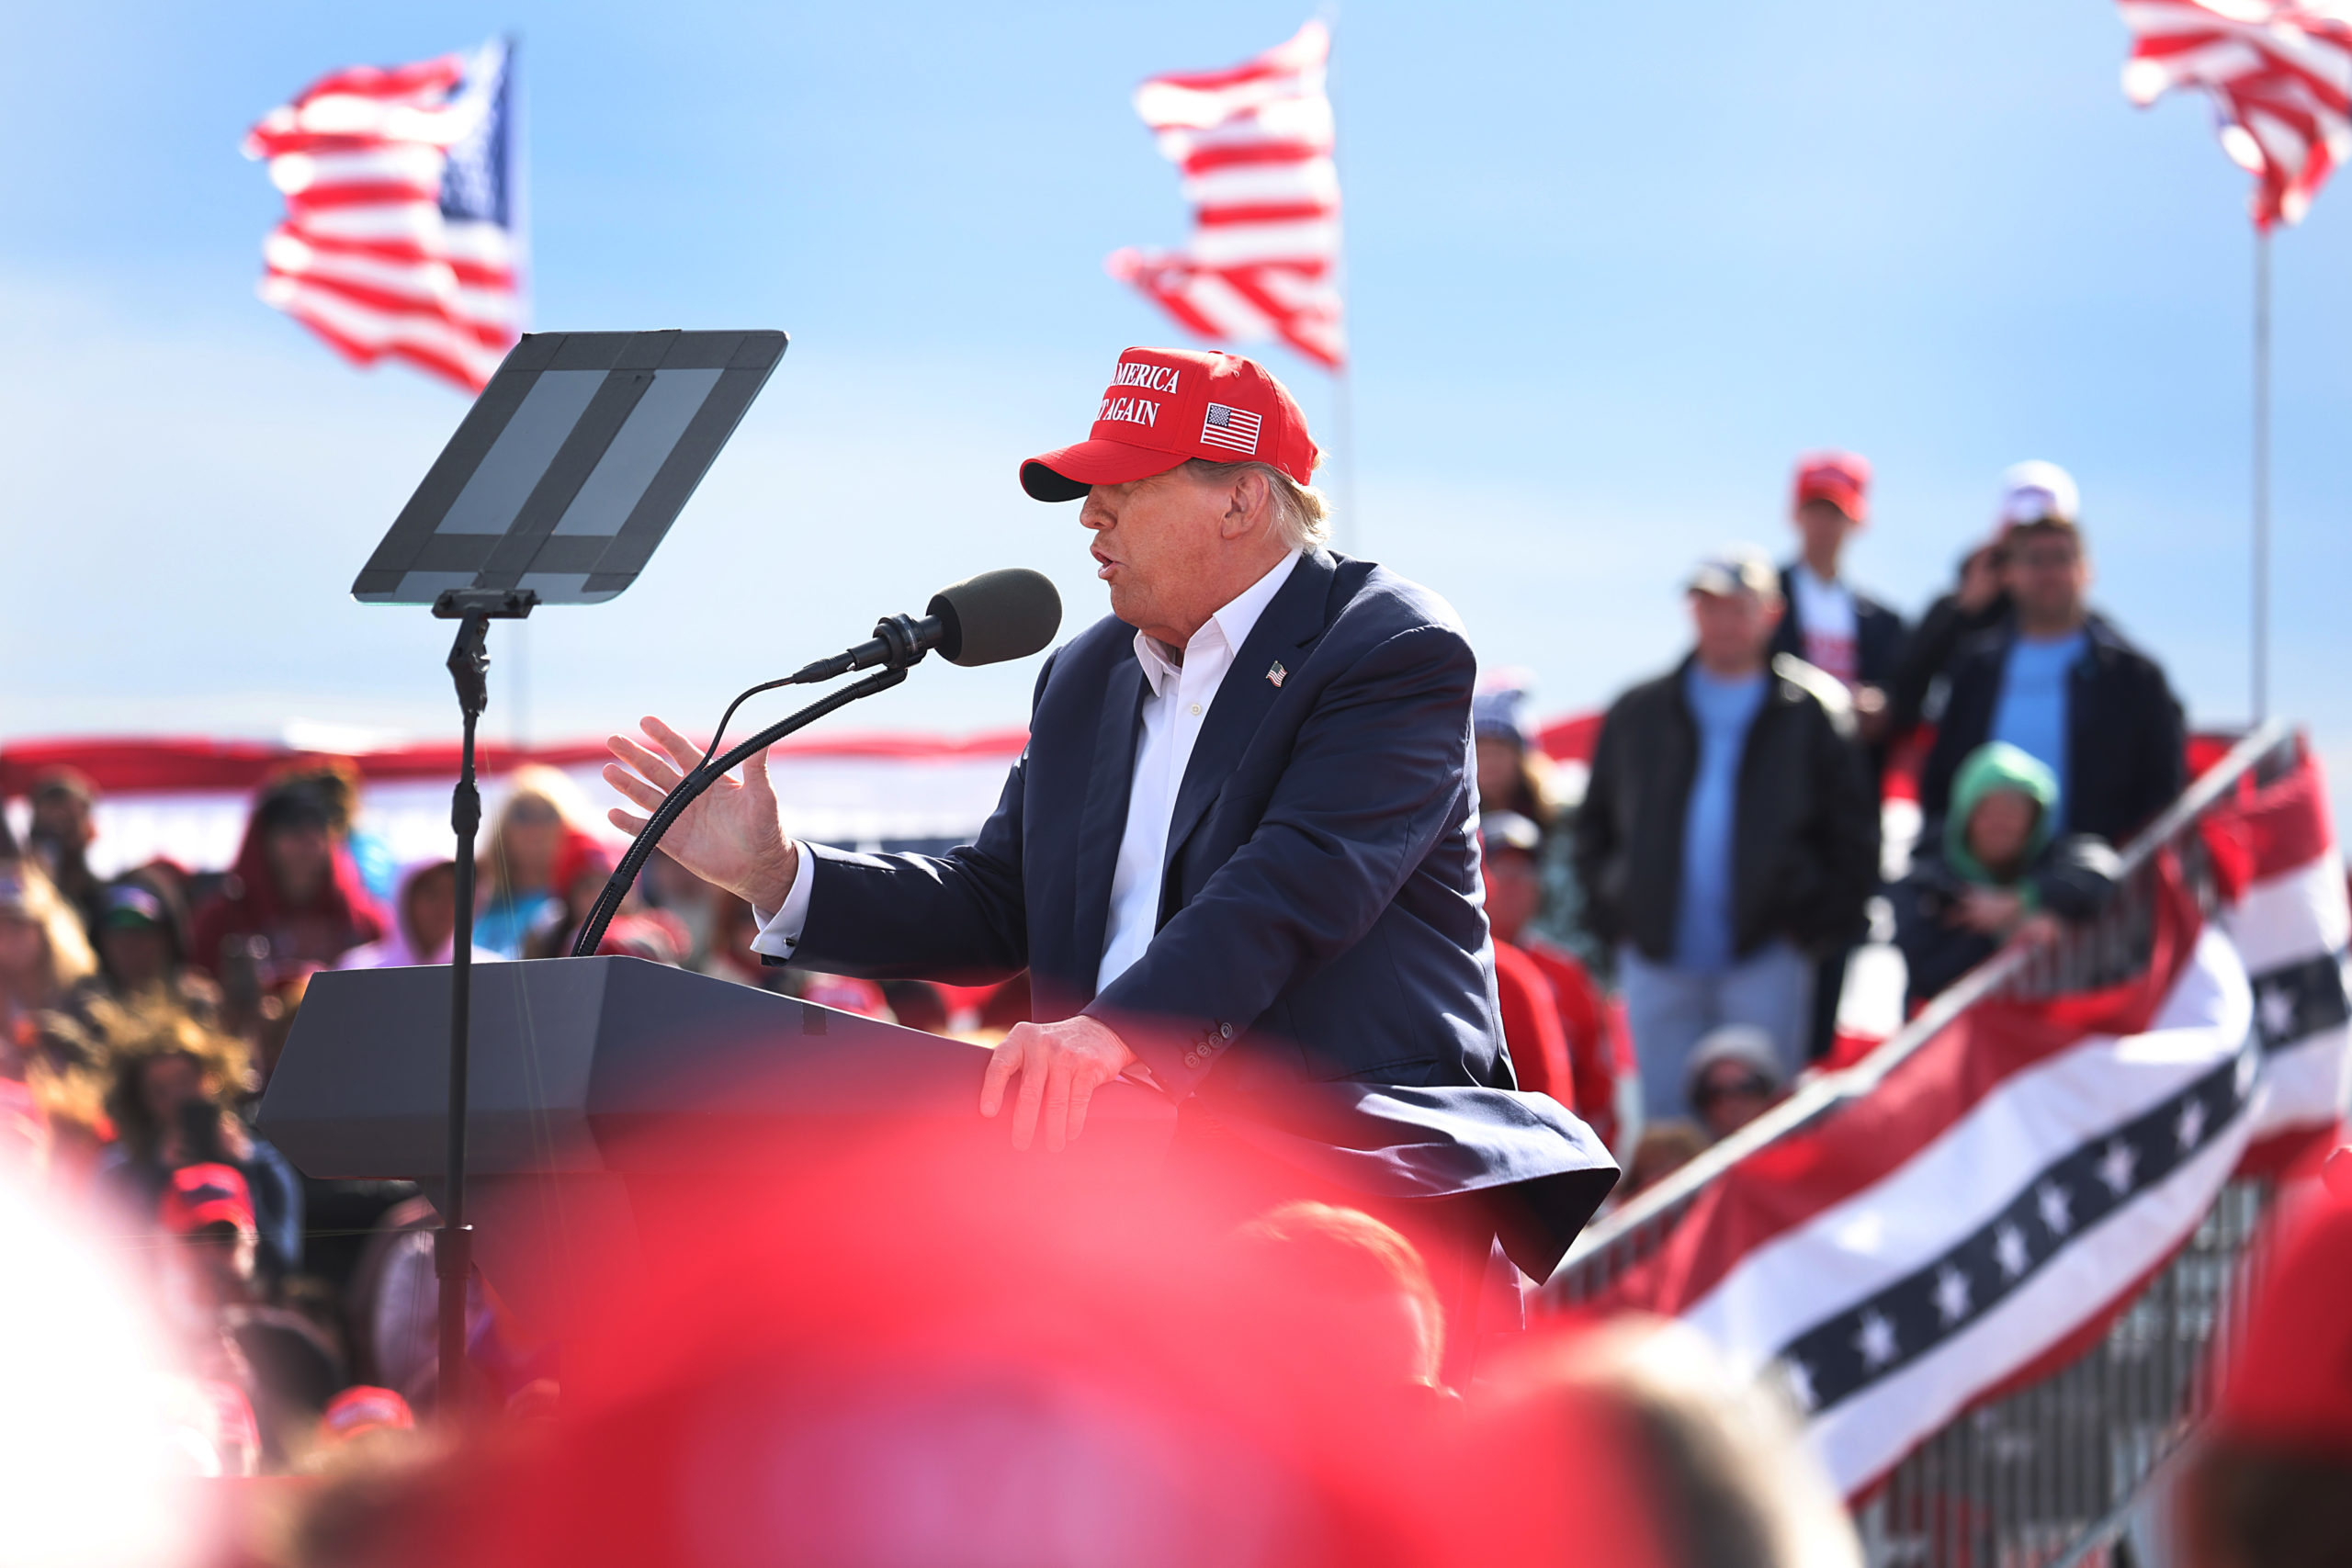 Republican presidential candidate former President Donald Trump speaks to supporters during a rally at the Dayton International Airport on March 16, 2024 in Vandalia, Ohio. The rally was hosted by the Buckeye Values PAC. (Photo by Scott Olson/Getty Images)